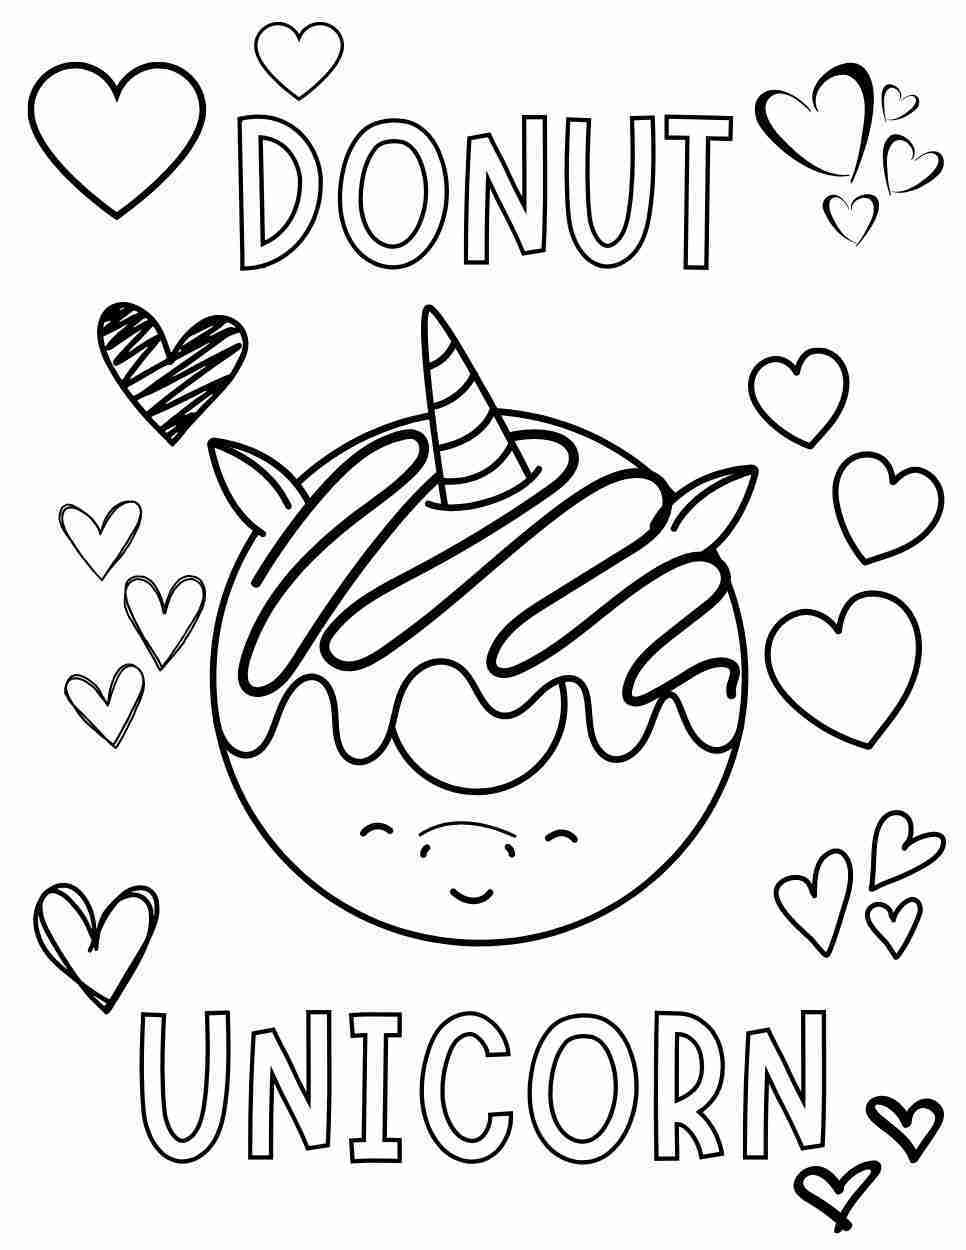 unicorn donut coloring page